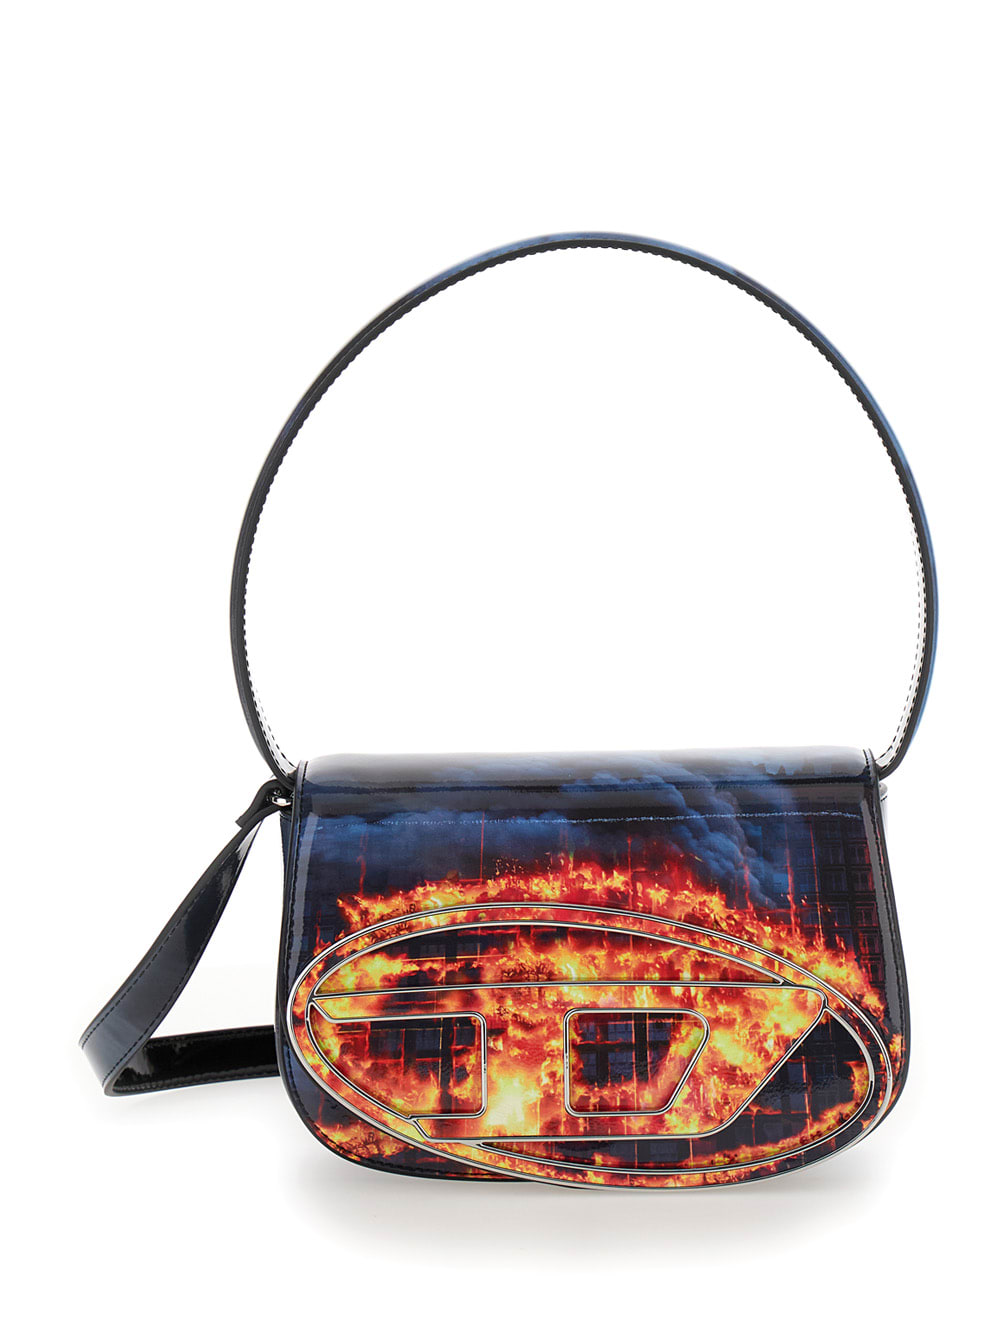 DIESEL 1DR BLUE AND ORANGE SHOULDER BAG WITH FRONT METALLIC OVAL D LOGO IN TECHNO FABRIC WOMAN